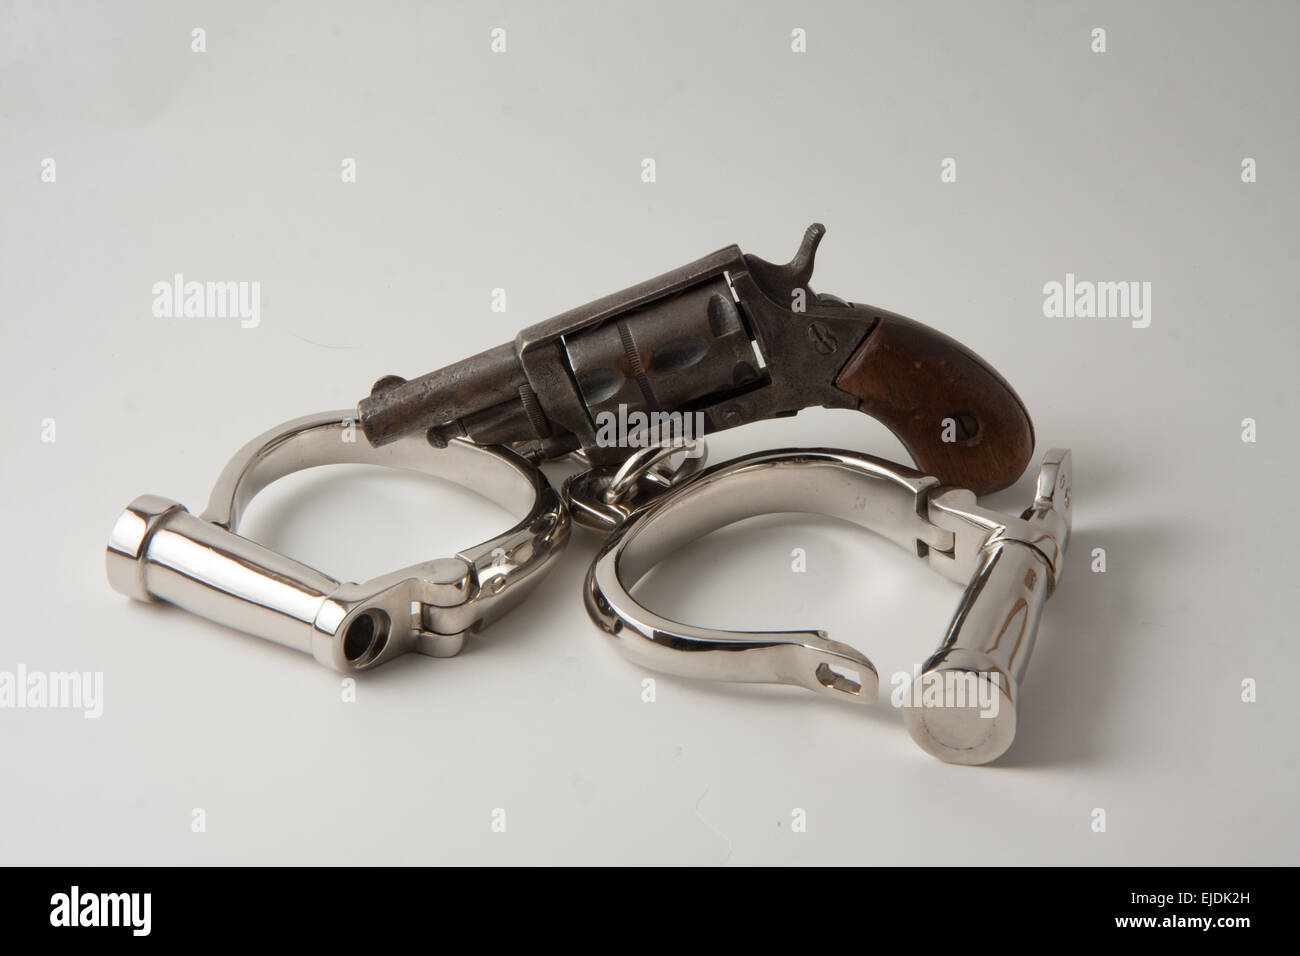 old handcuffs with locking screw English style and revolver derringer Stock Photo